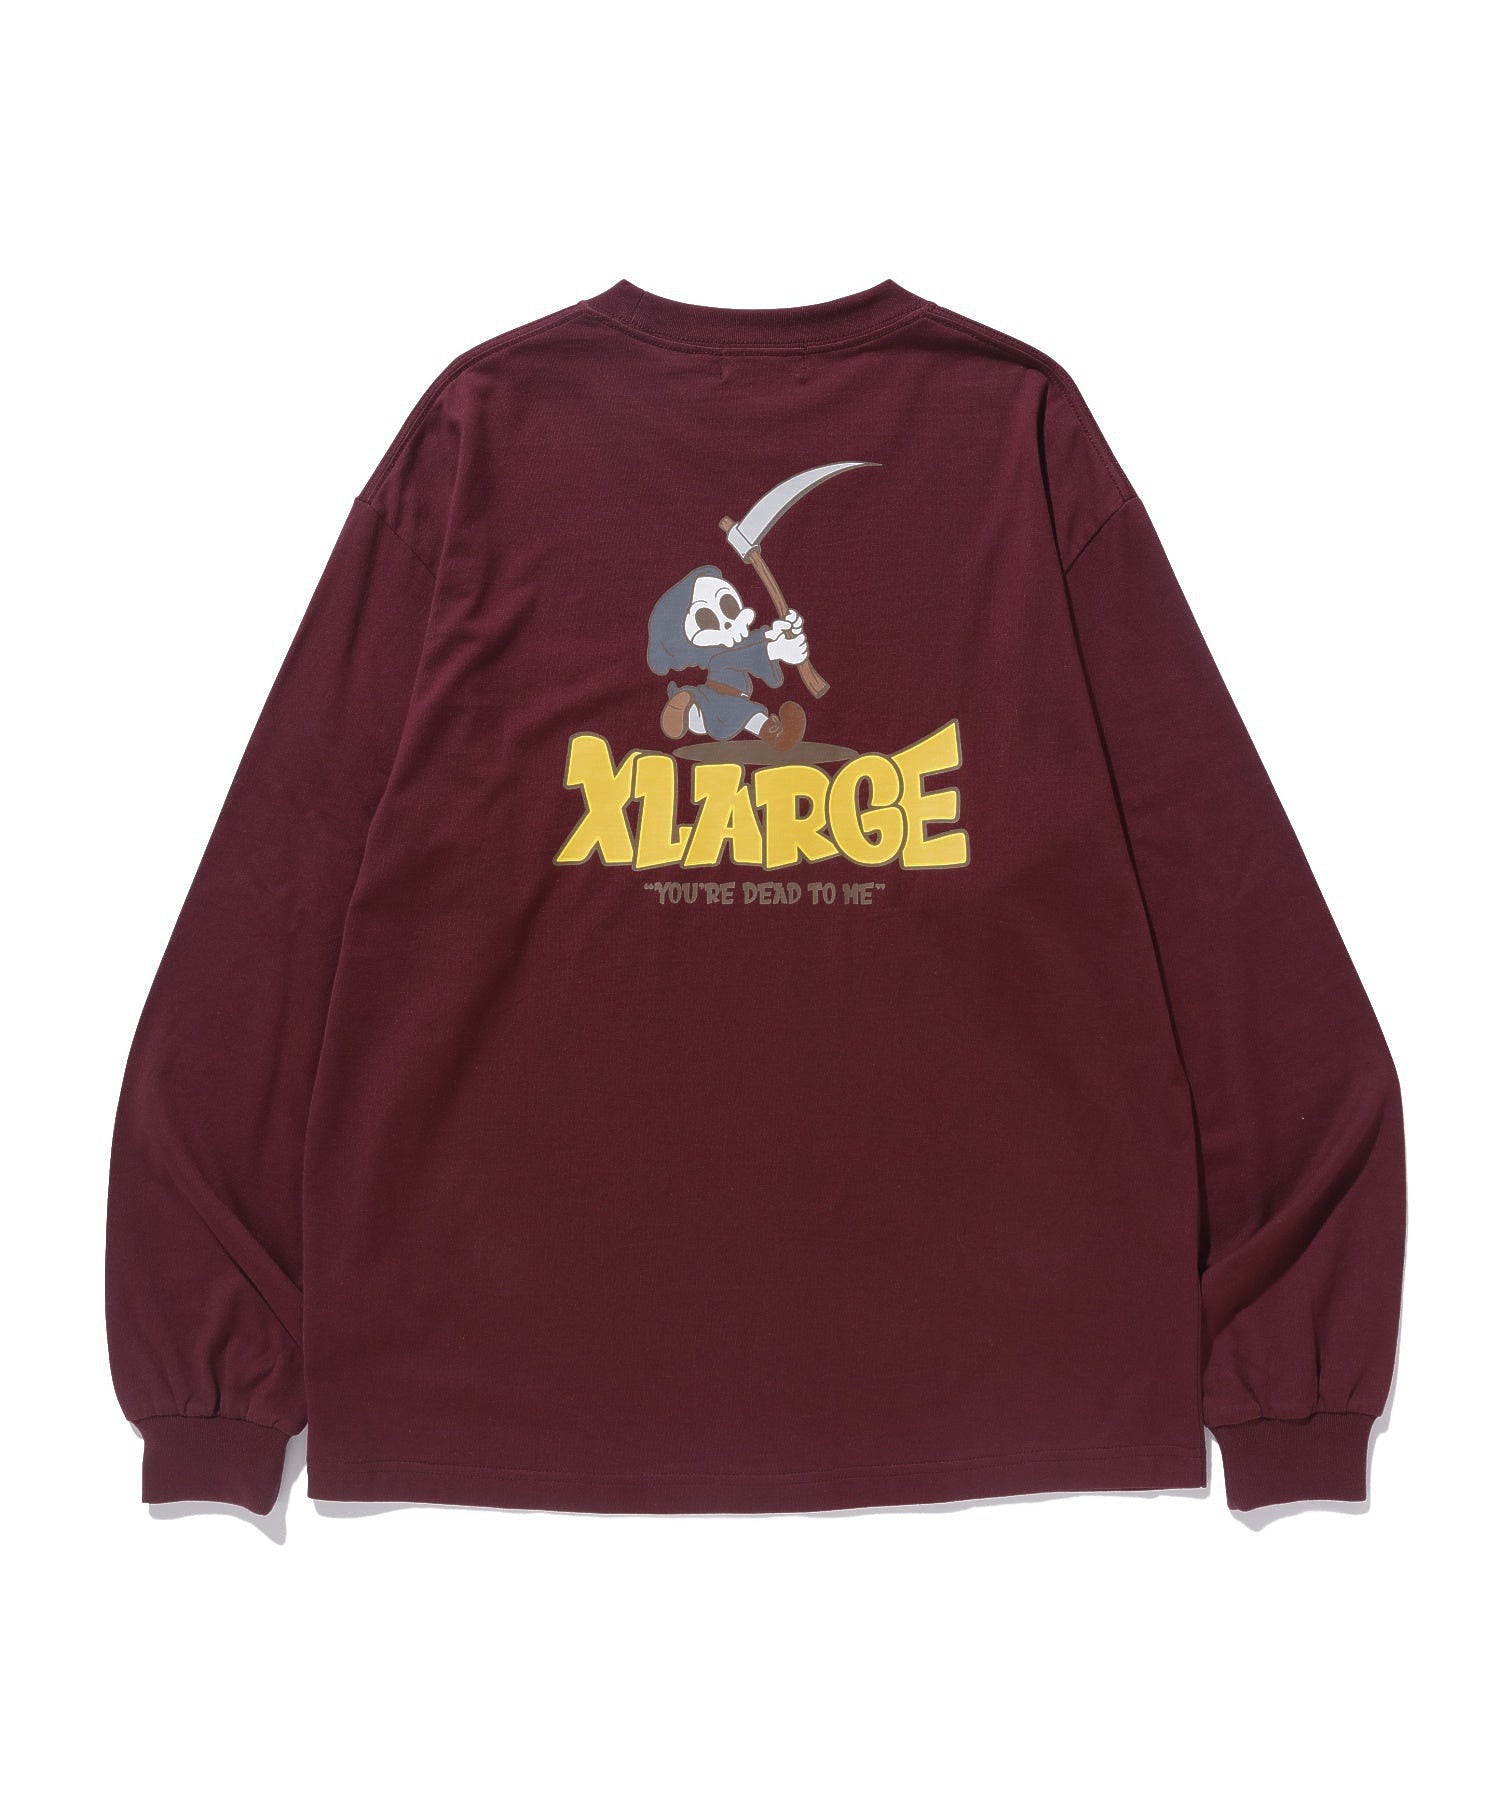 YOURE DEAD TO ME L/S TEE XLARGE